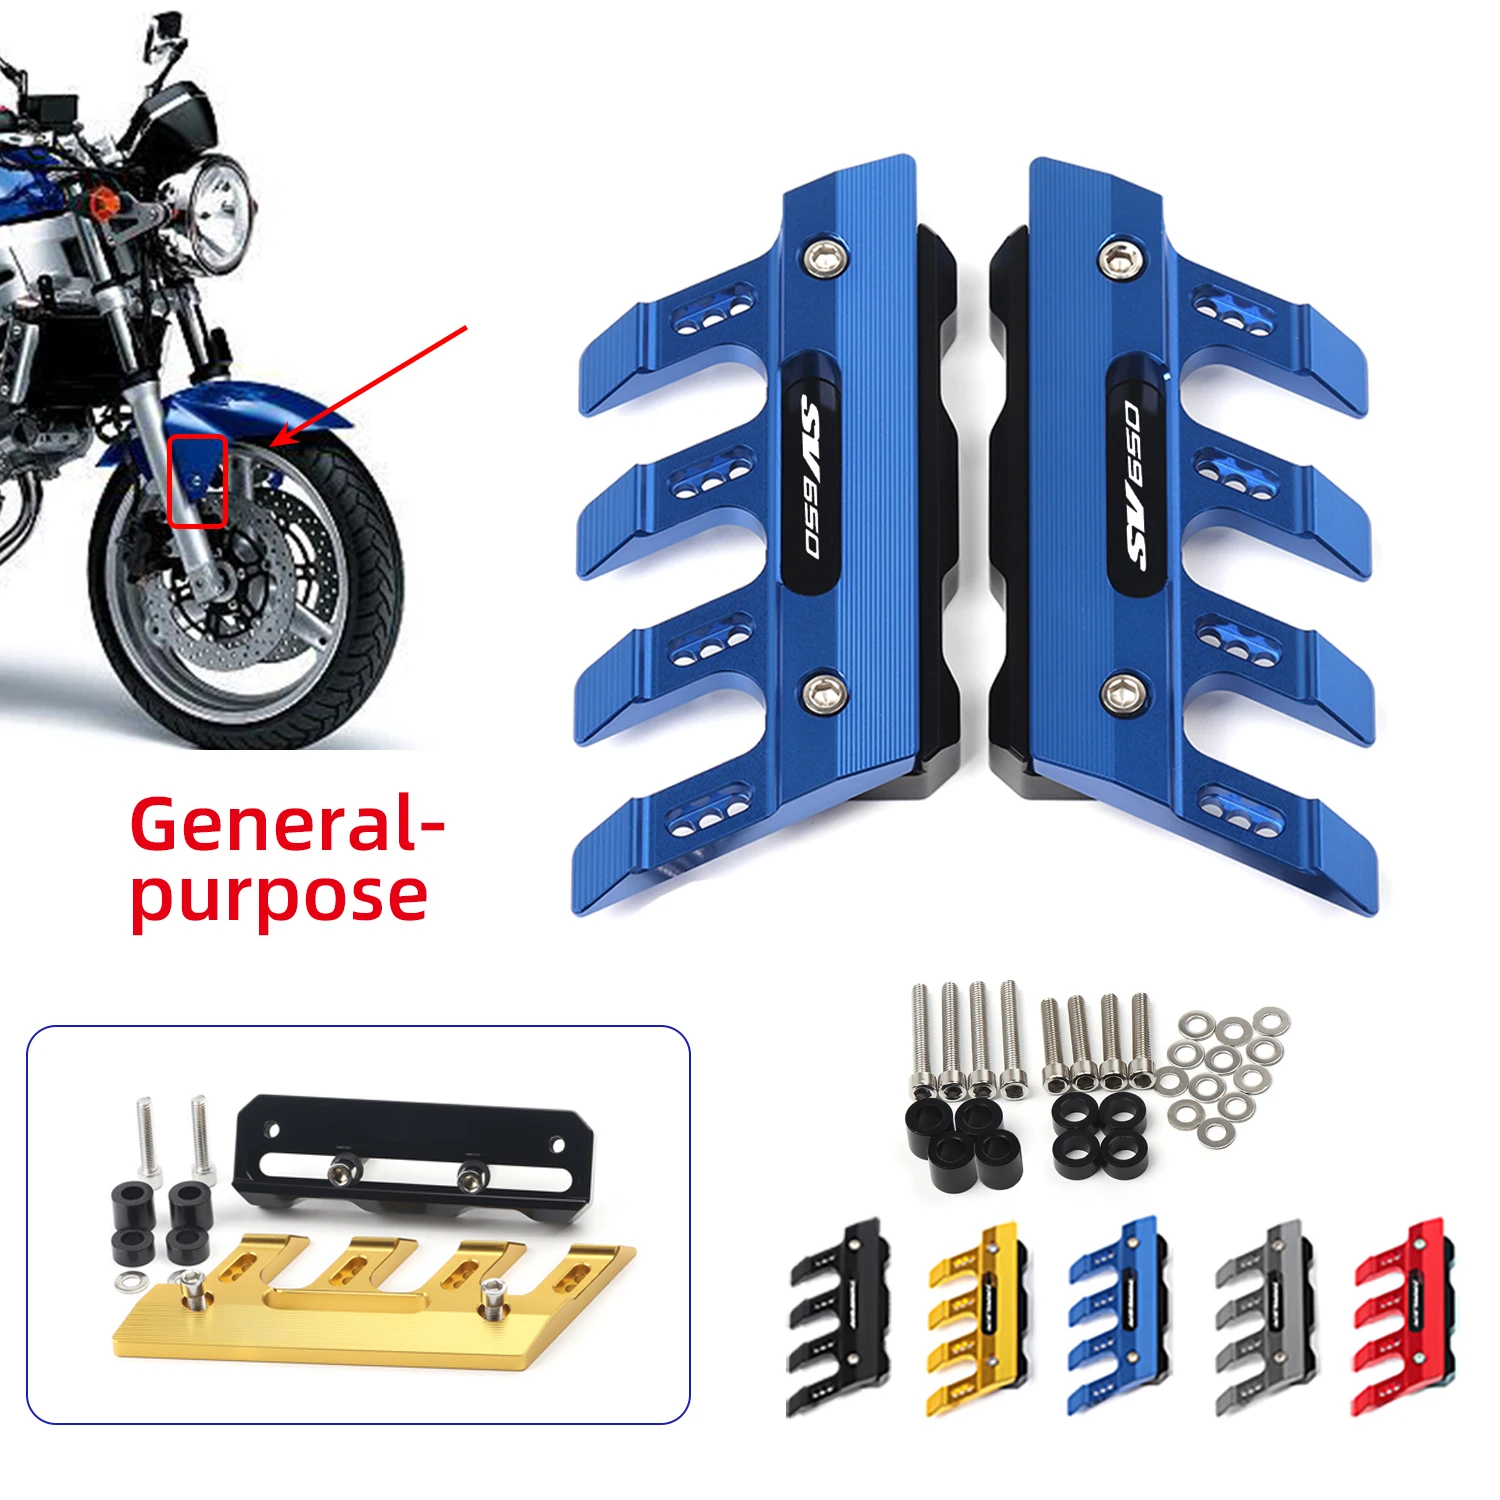 

Motorcycle Front Fender Side Protection Guard Mudguard Sliders For Suzuki SV650 SV650S SV650A SV650X SV 650Accessories universal